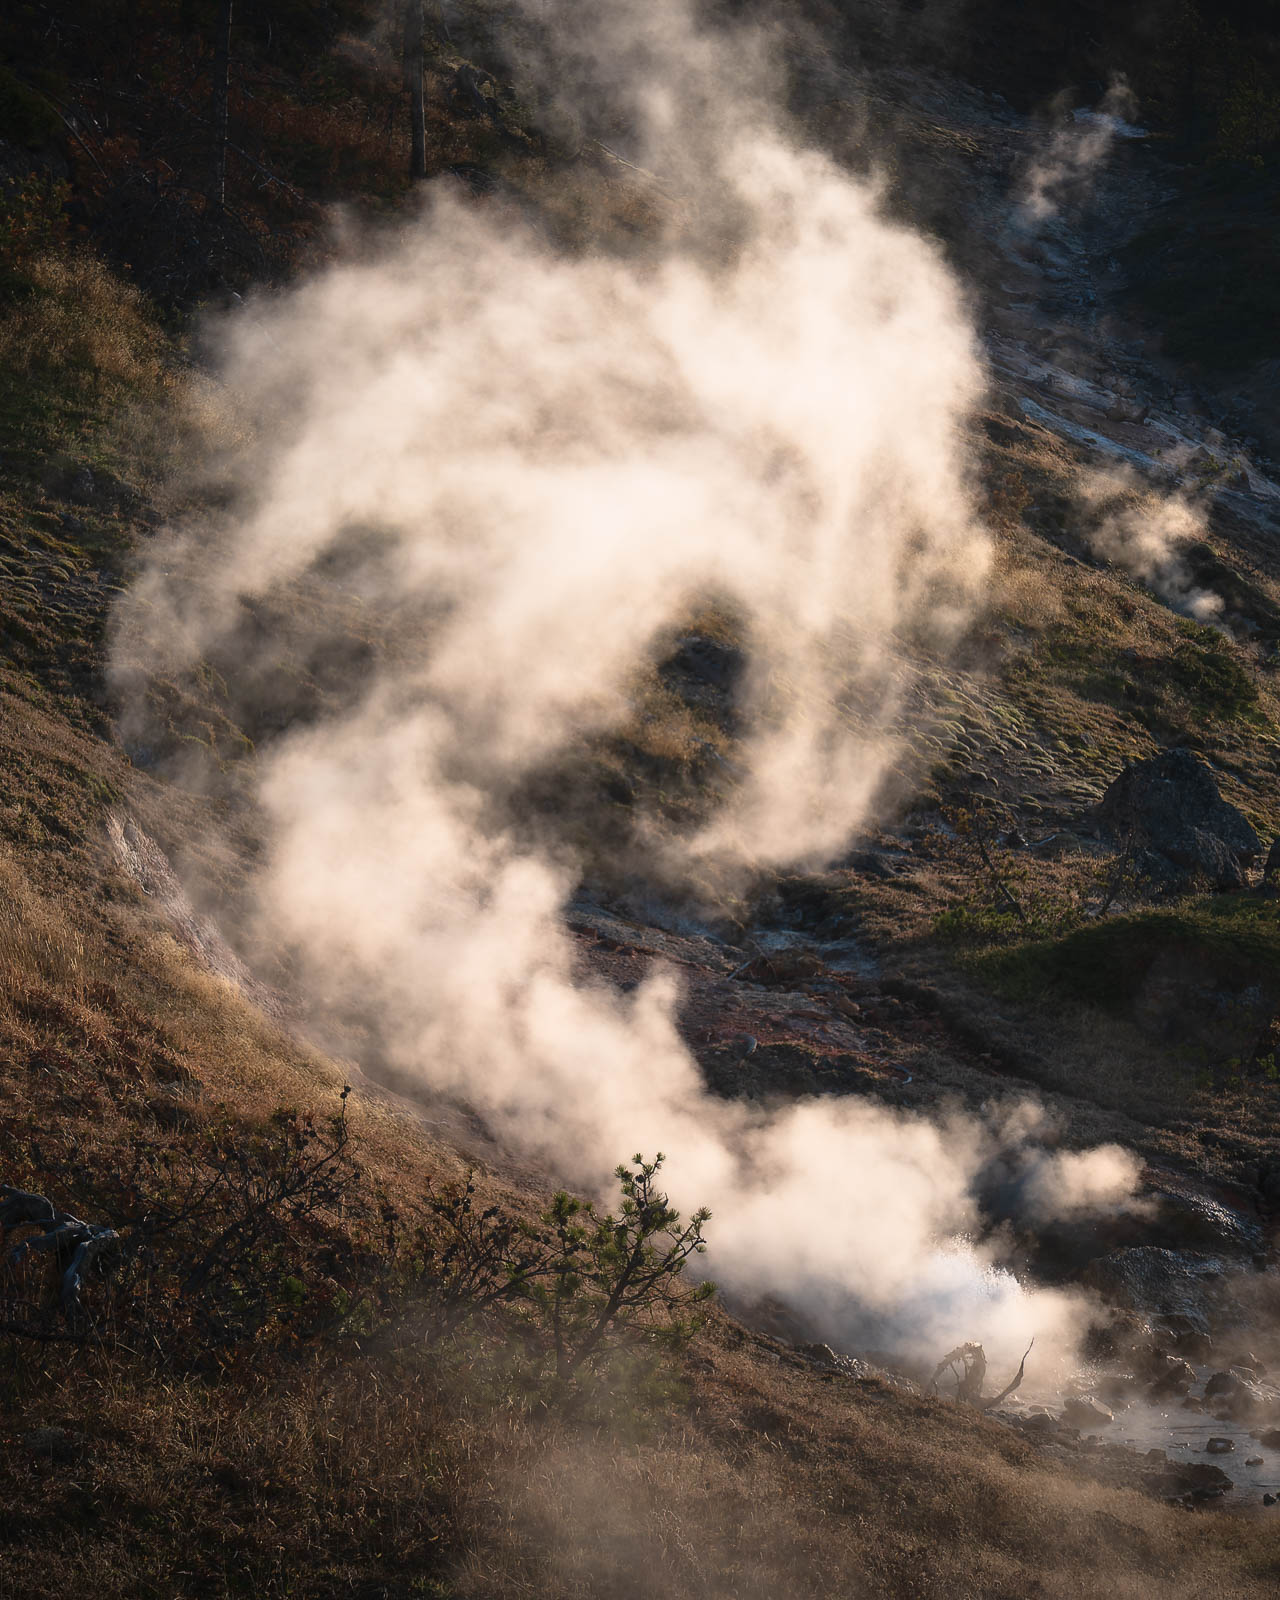 Steam rising from a thermal feature in Yellowstone National Park